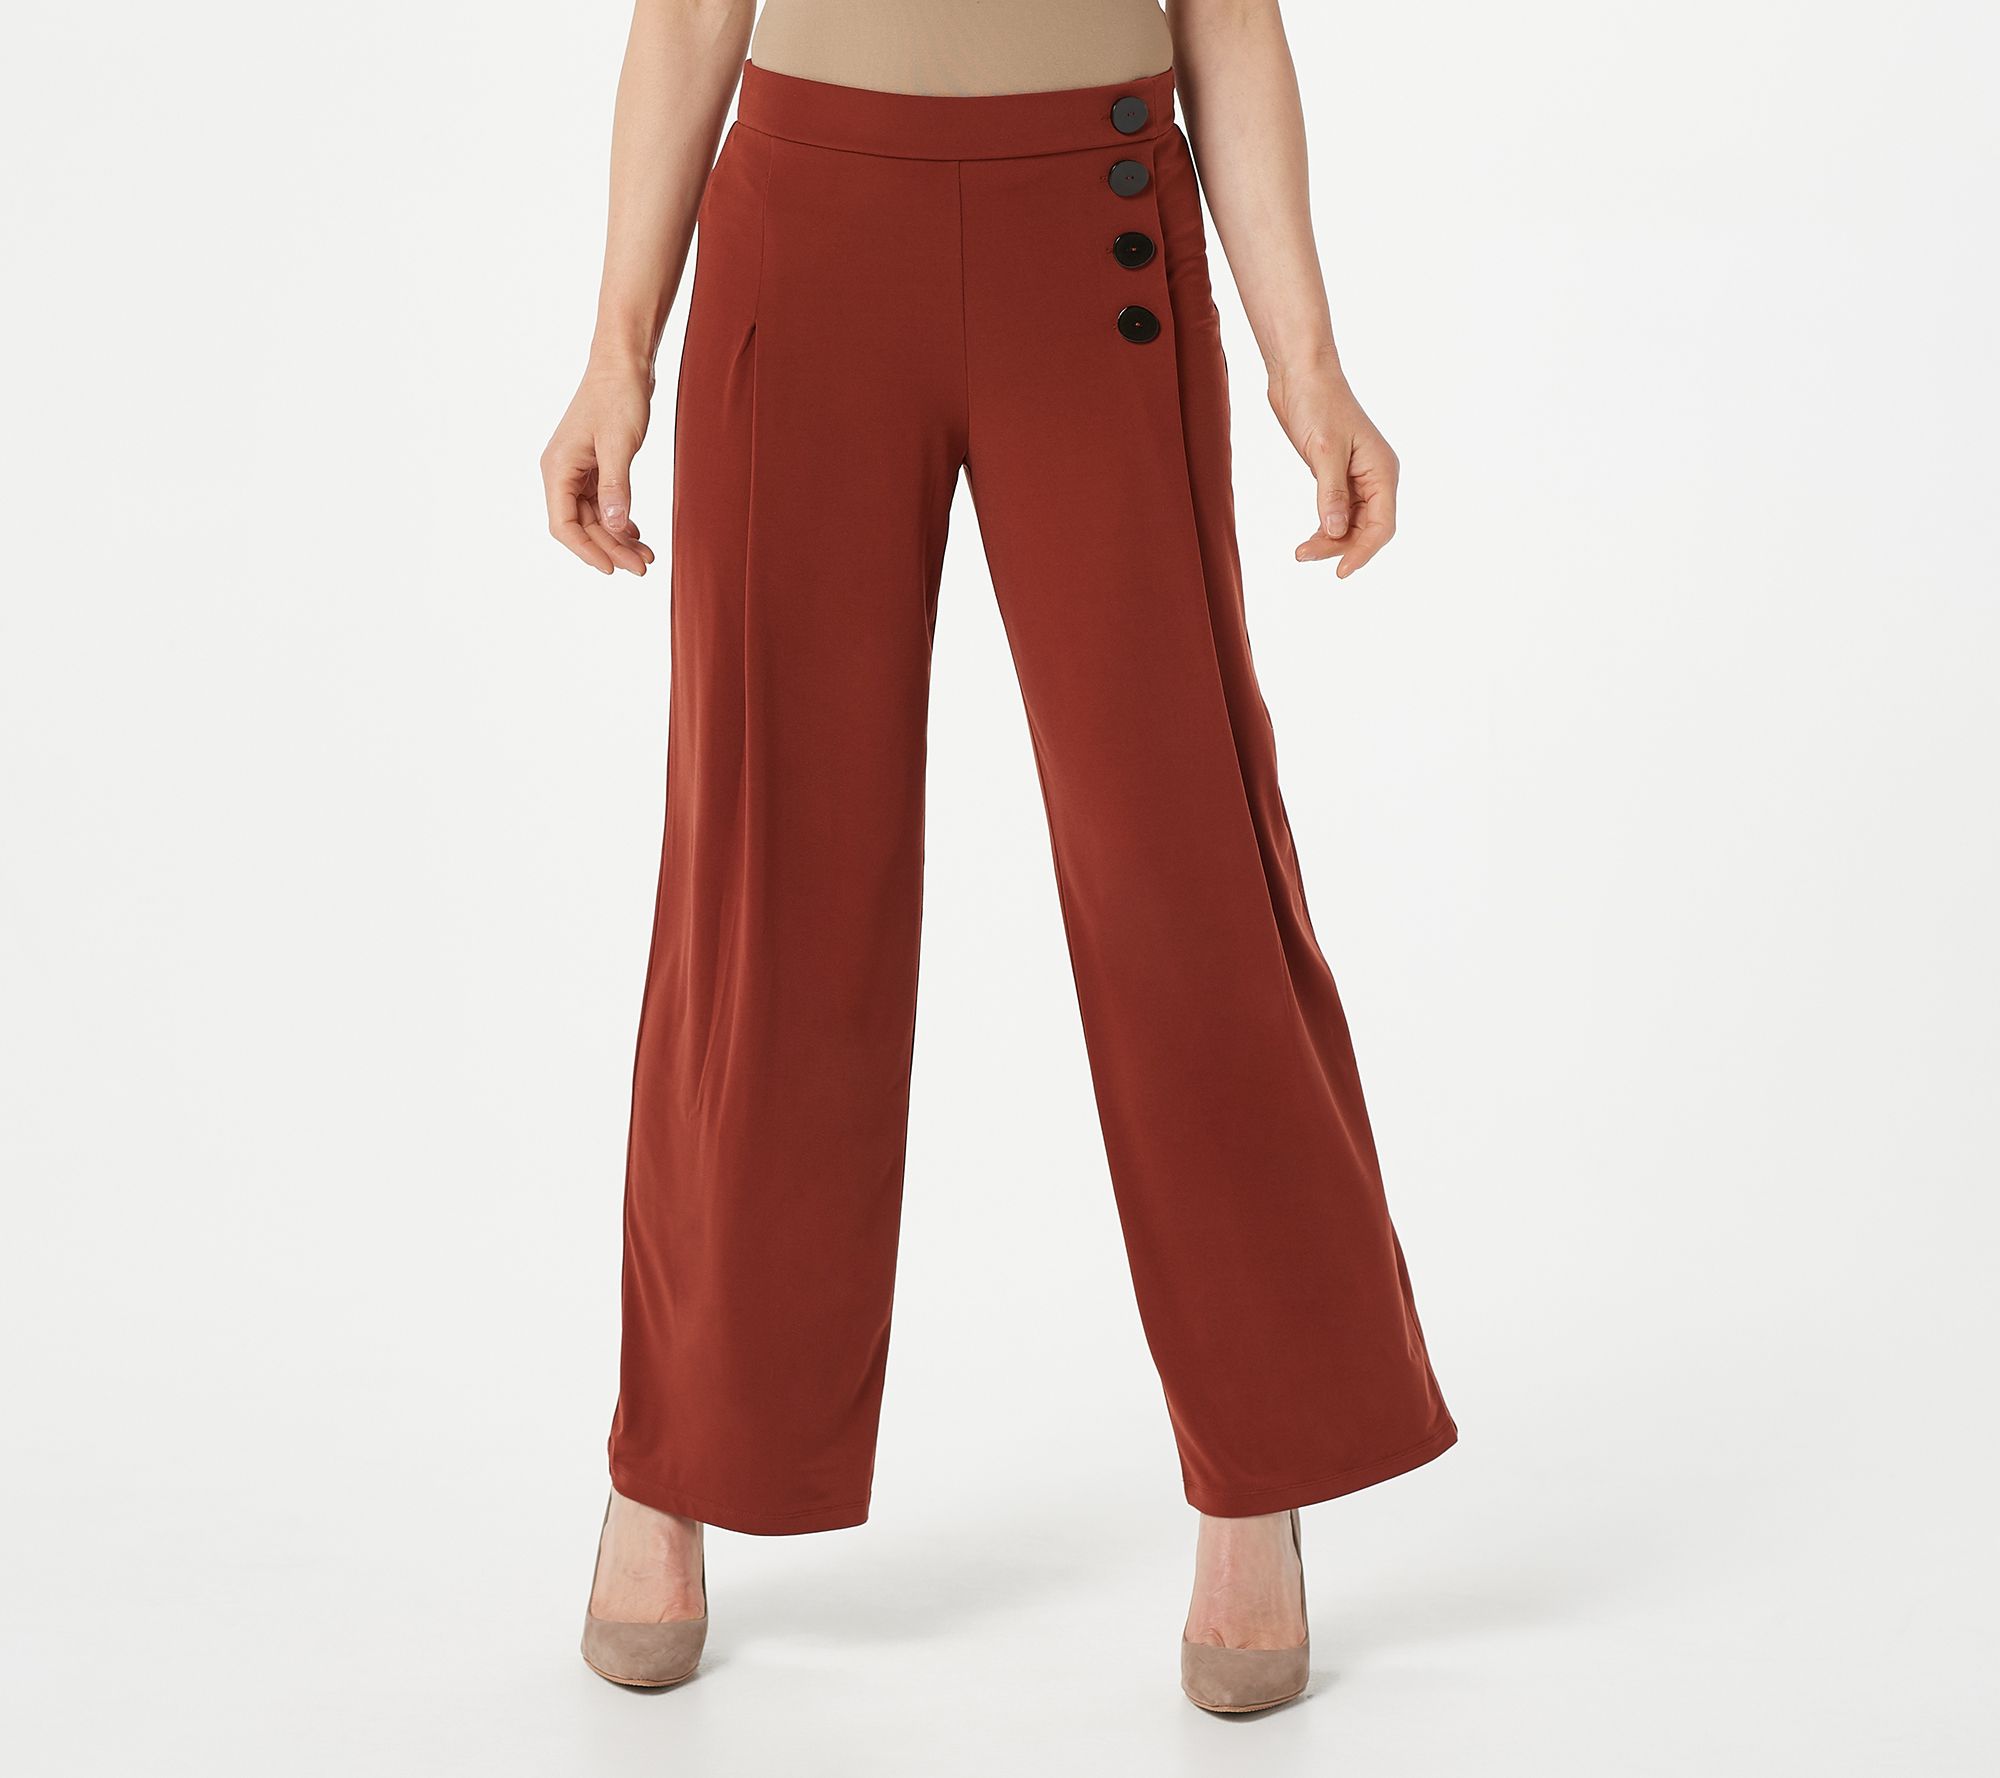 Every Day by Susan Graver Regular Liquid Knit Pull-On Pants - QVC.com